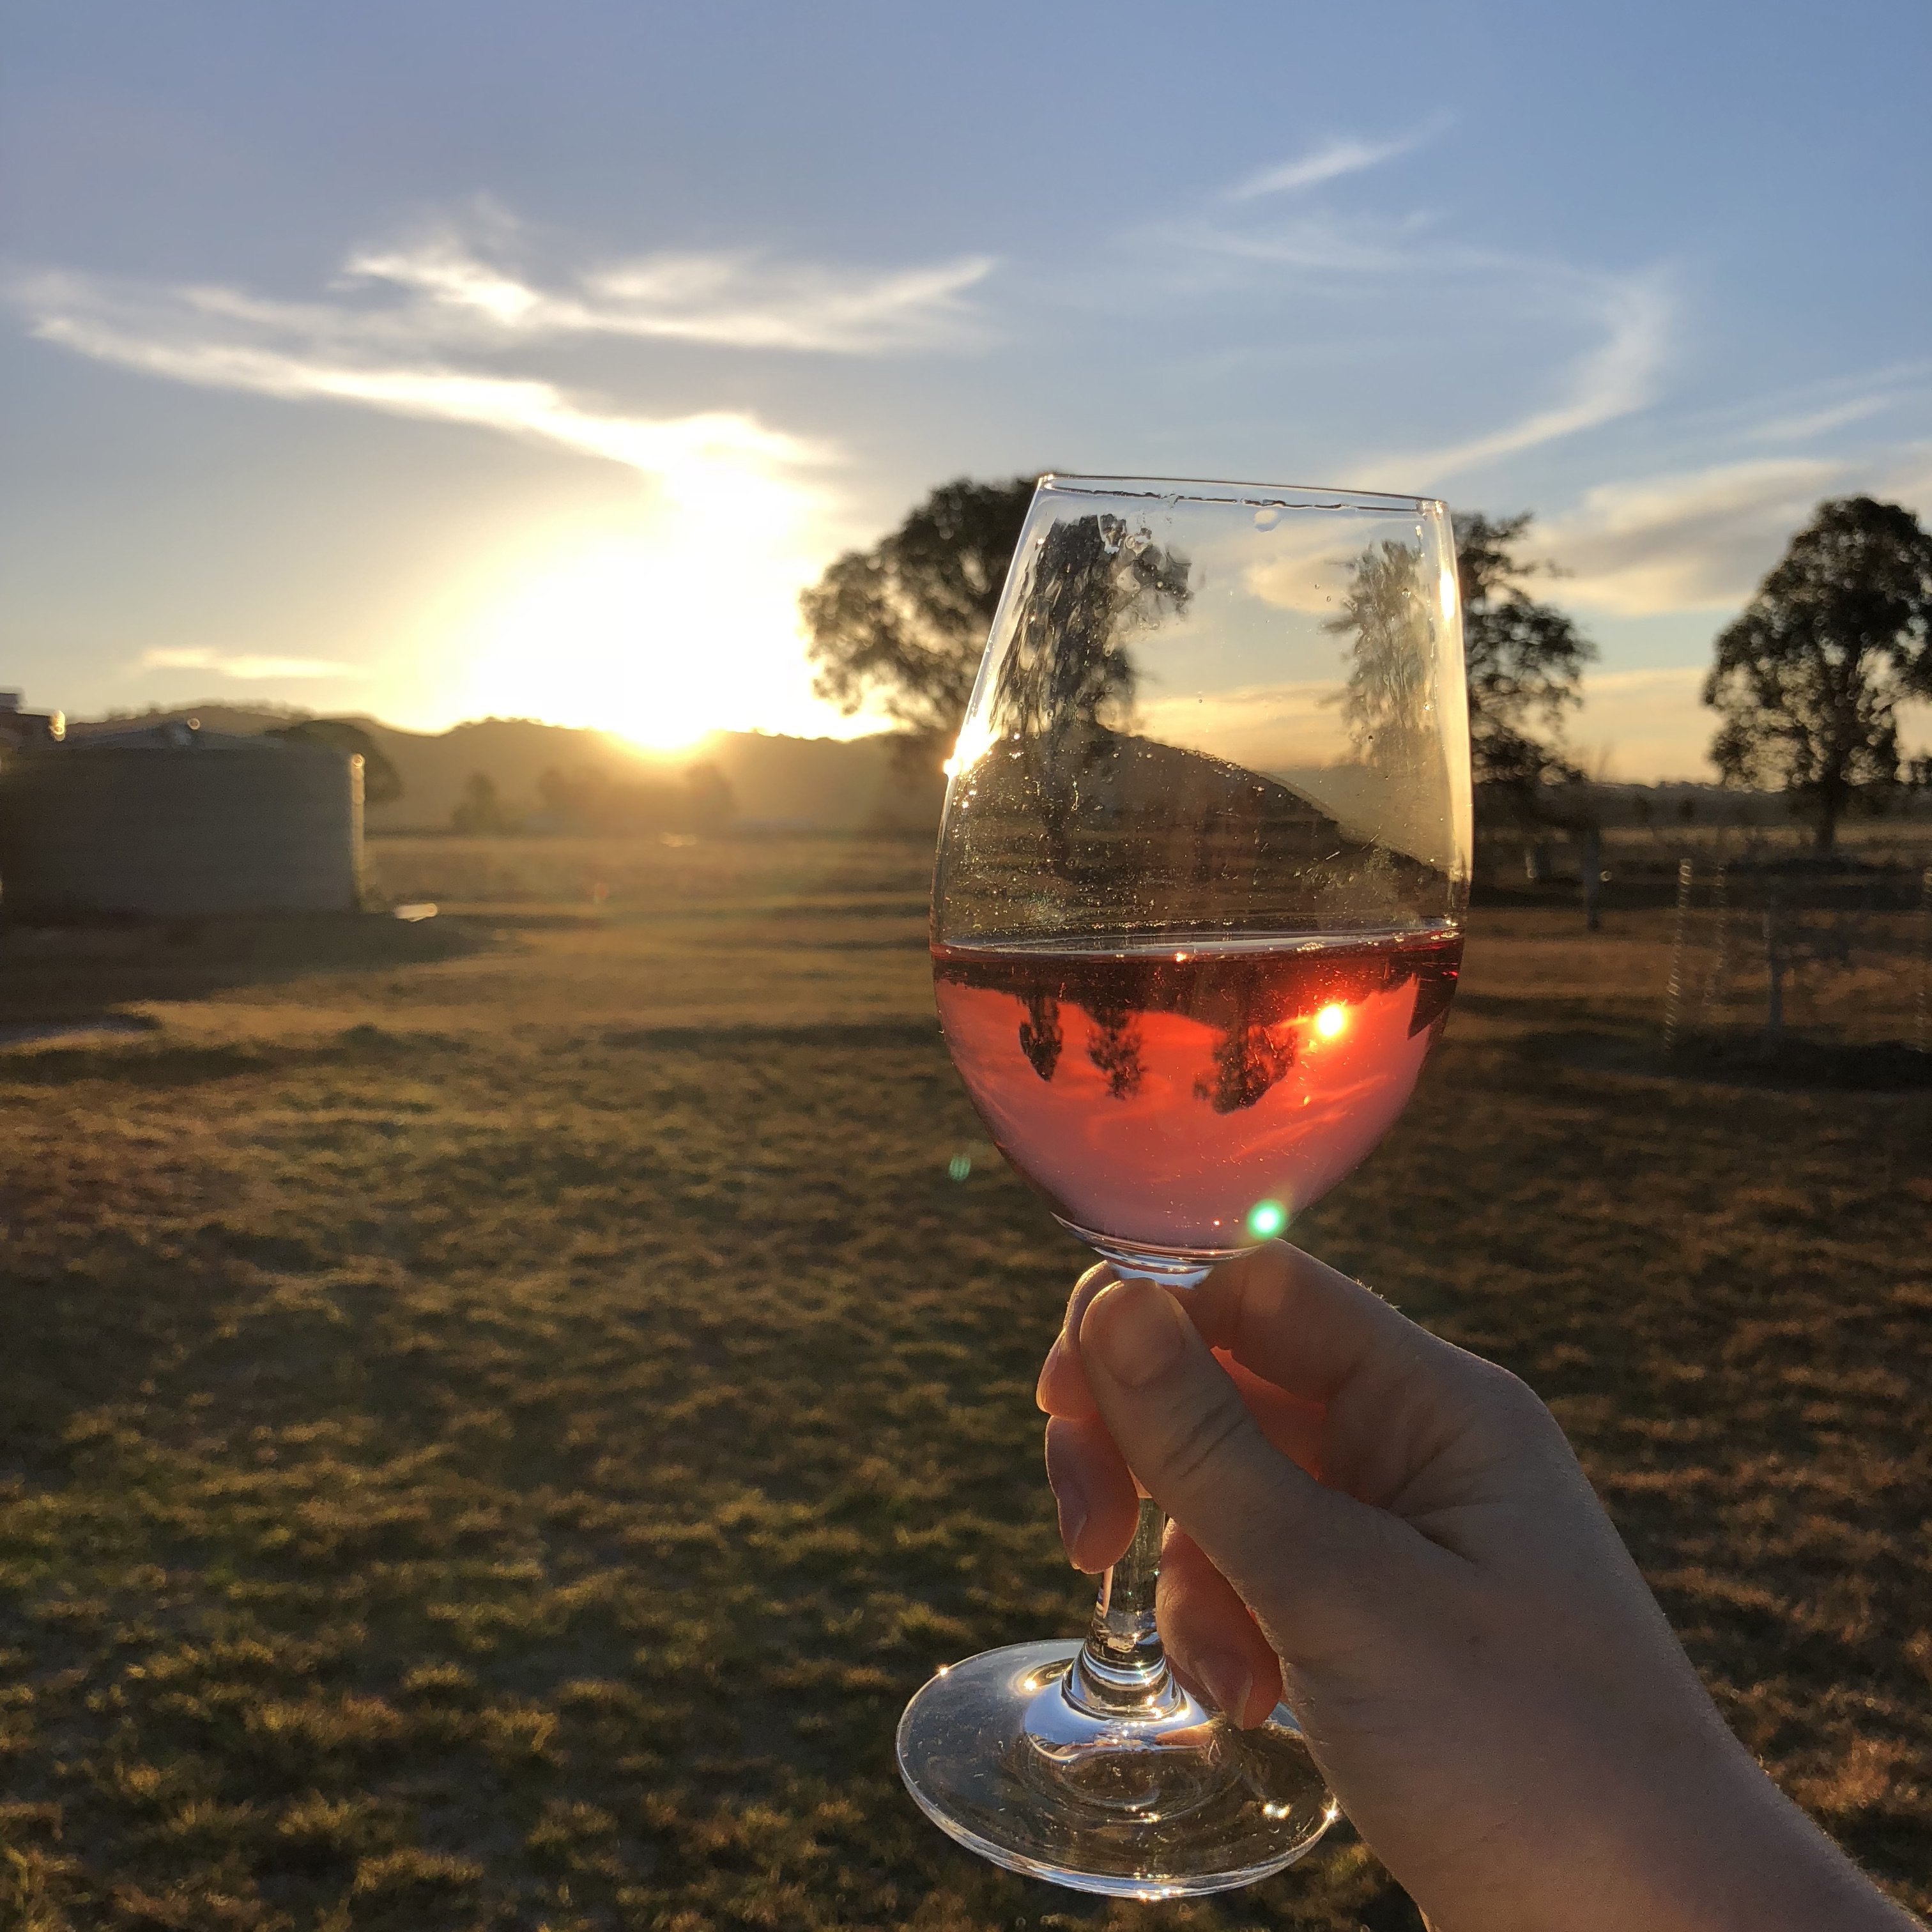 A glass of Burnbrae wine and sunset = winning